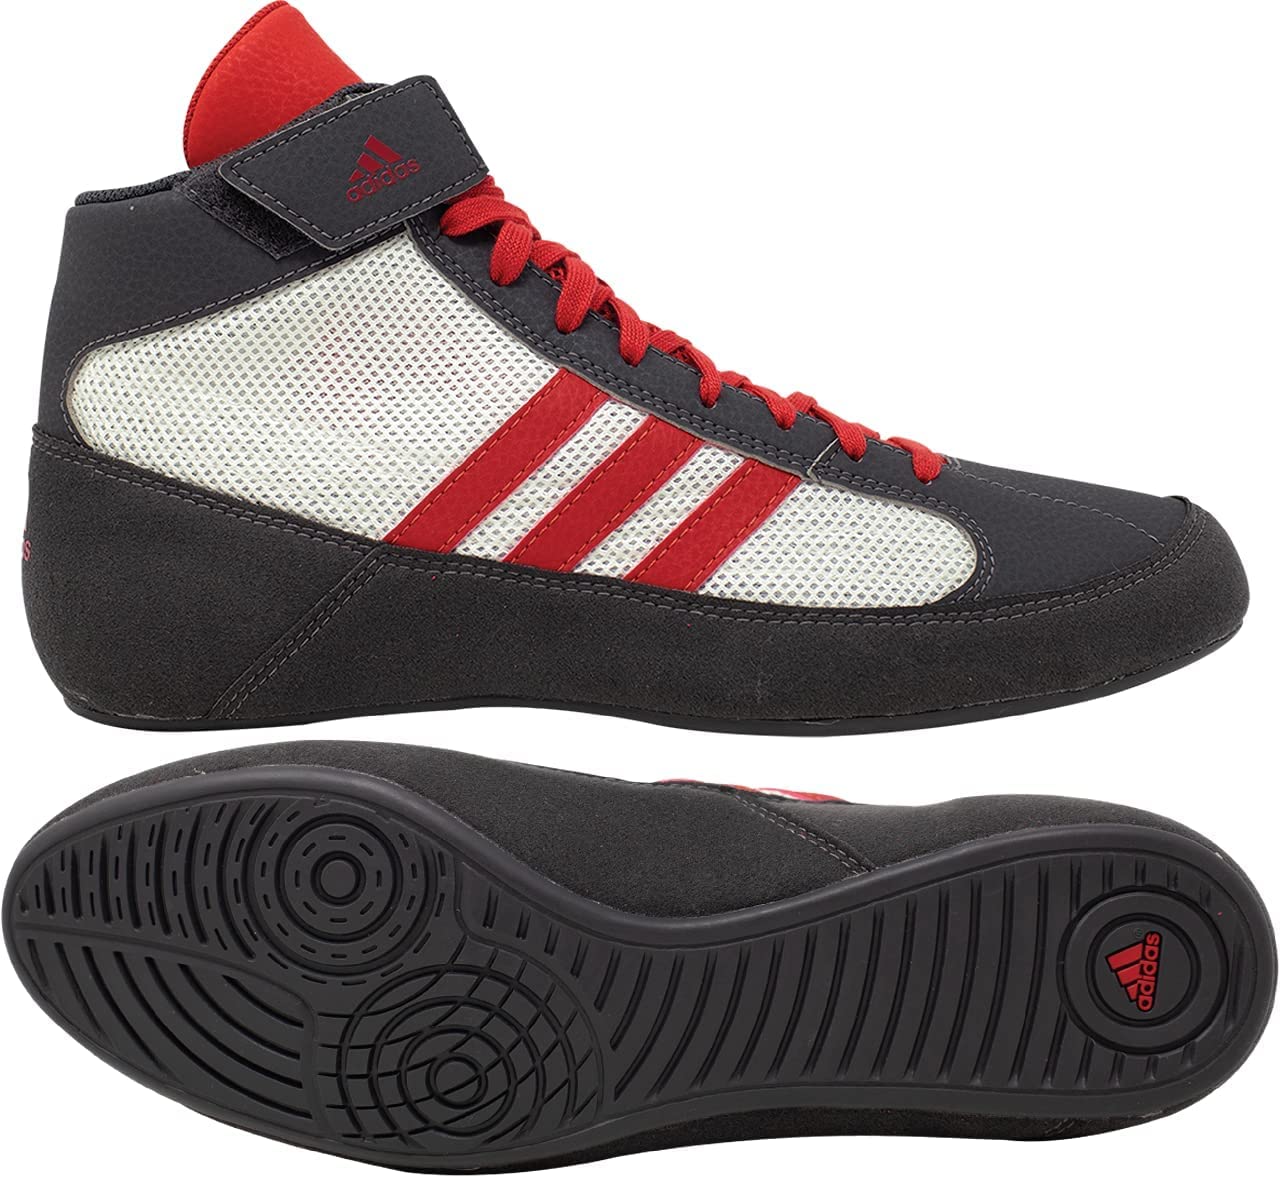 adidas Men's HVC Wrestling Shoes, Grey/White/Red, 10